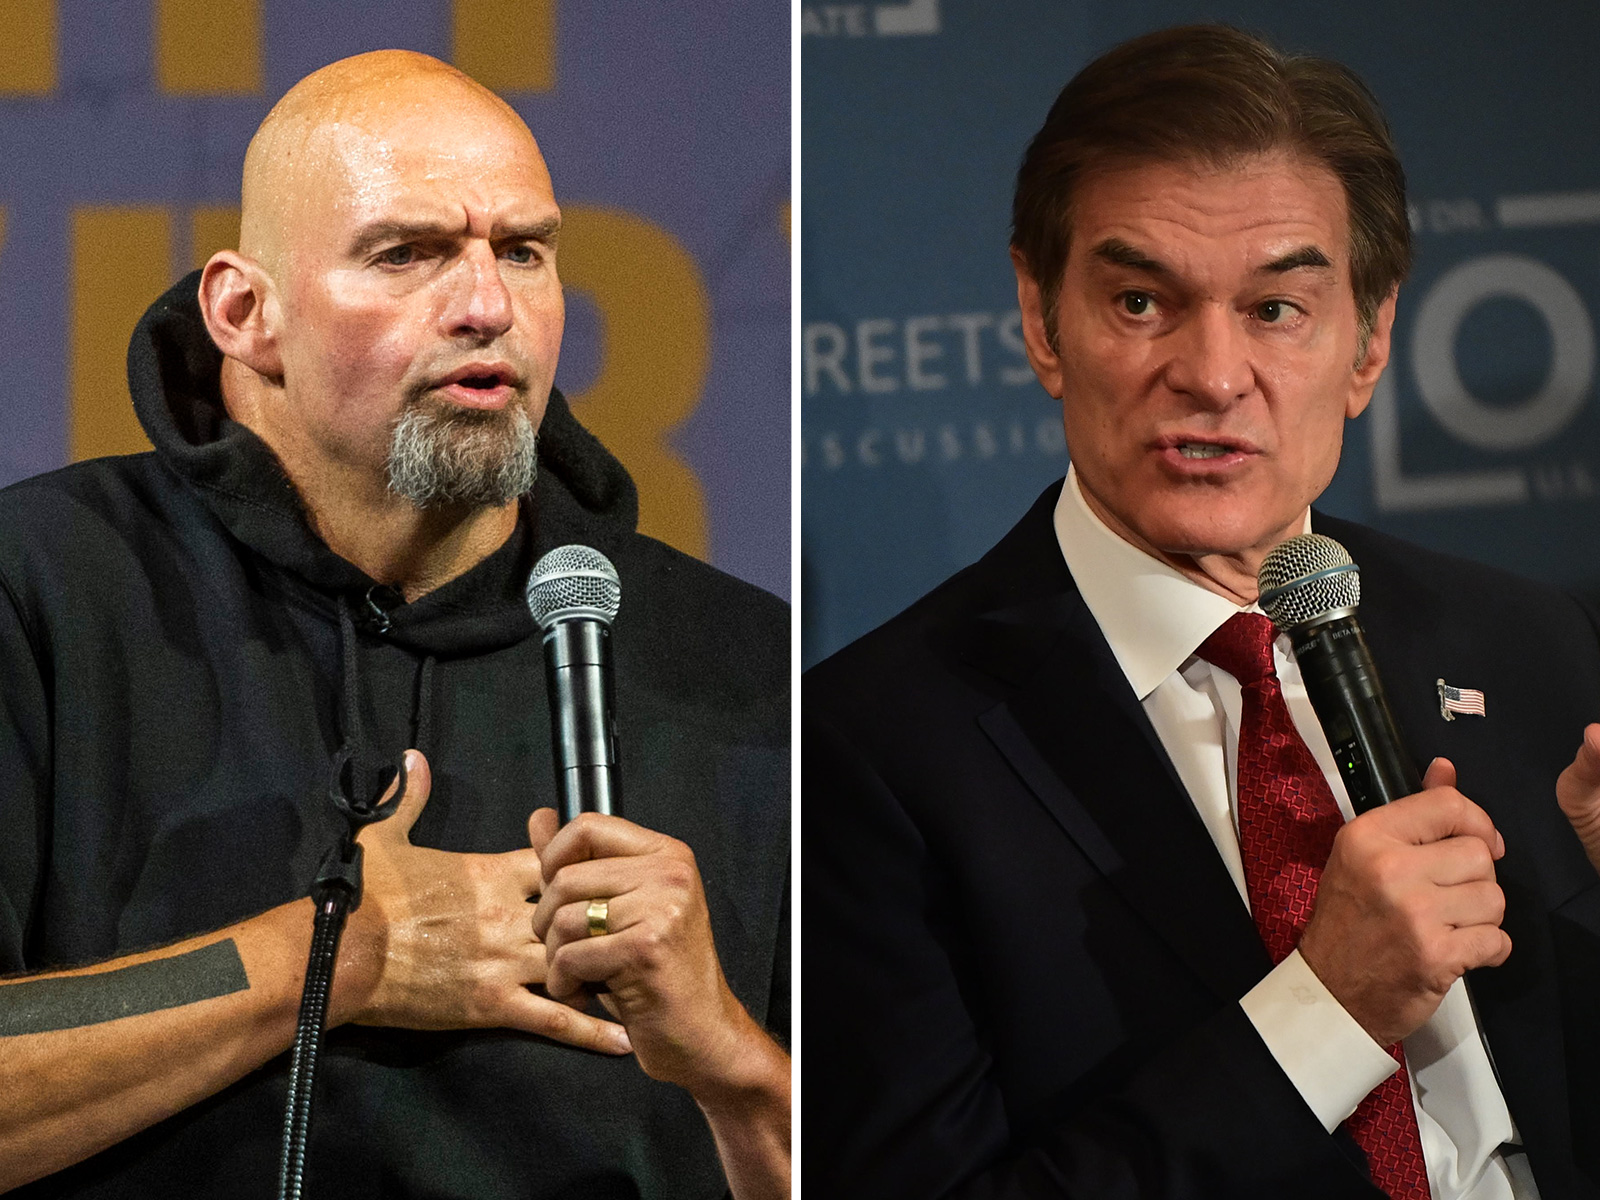 Dr. Oz Now Predicted to Defeat John Fetterman in PA Senate Race